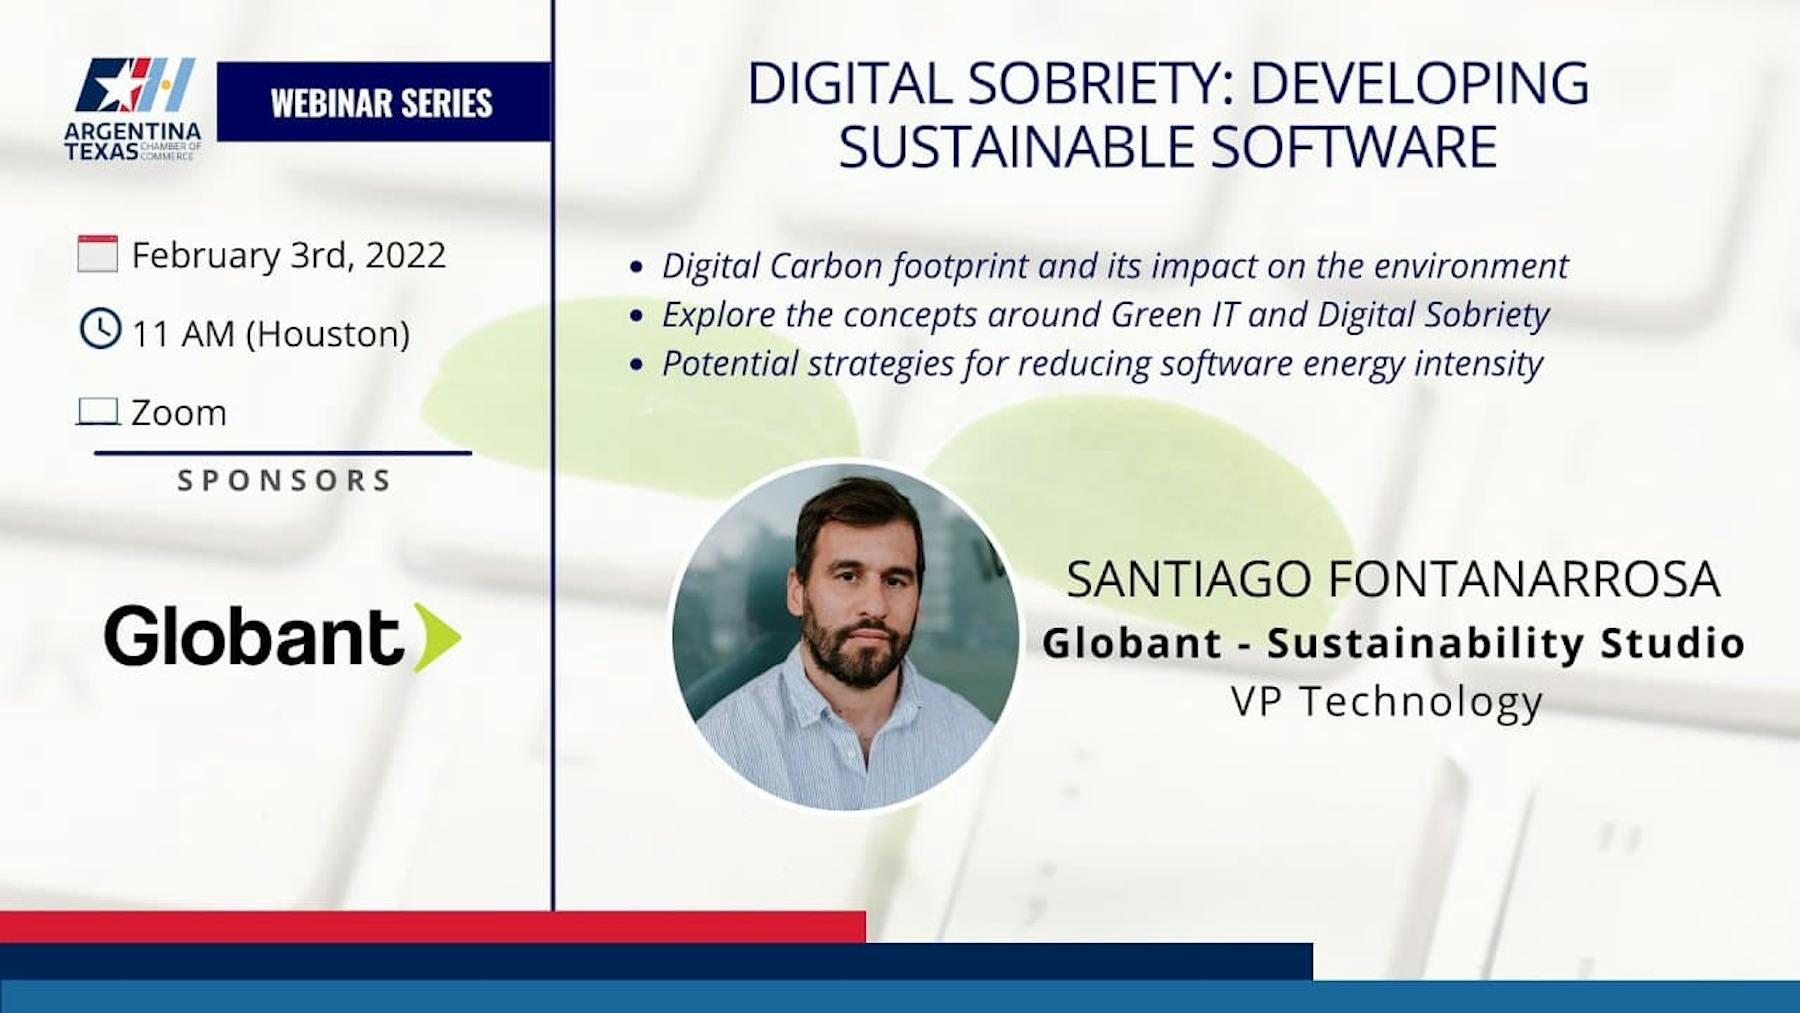 digital sobriety: developing sustainable software